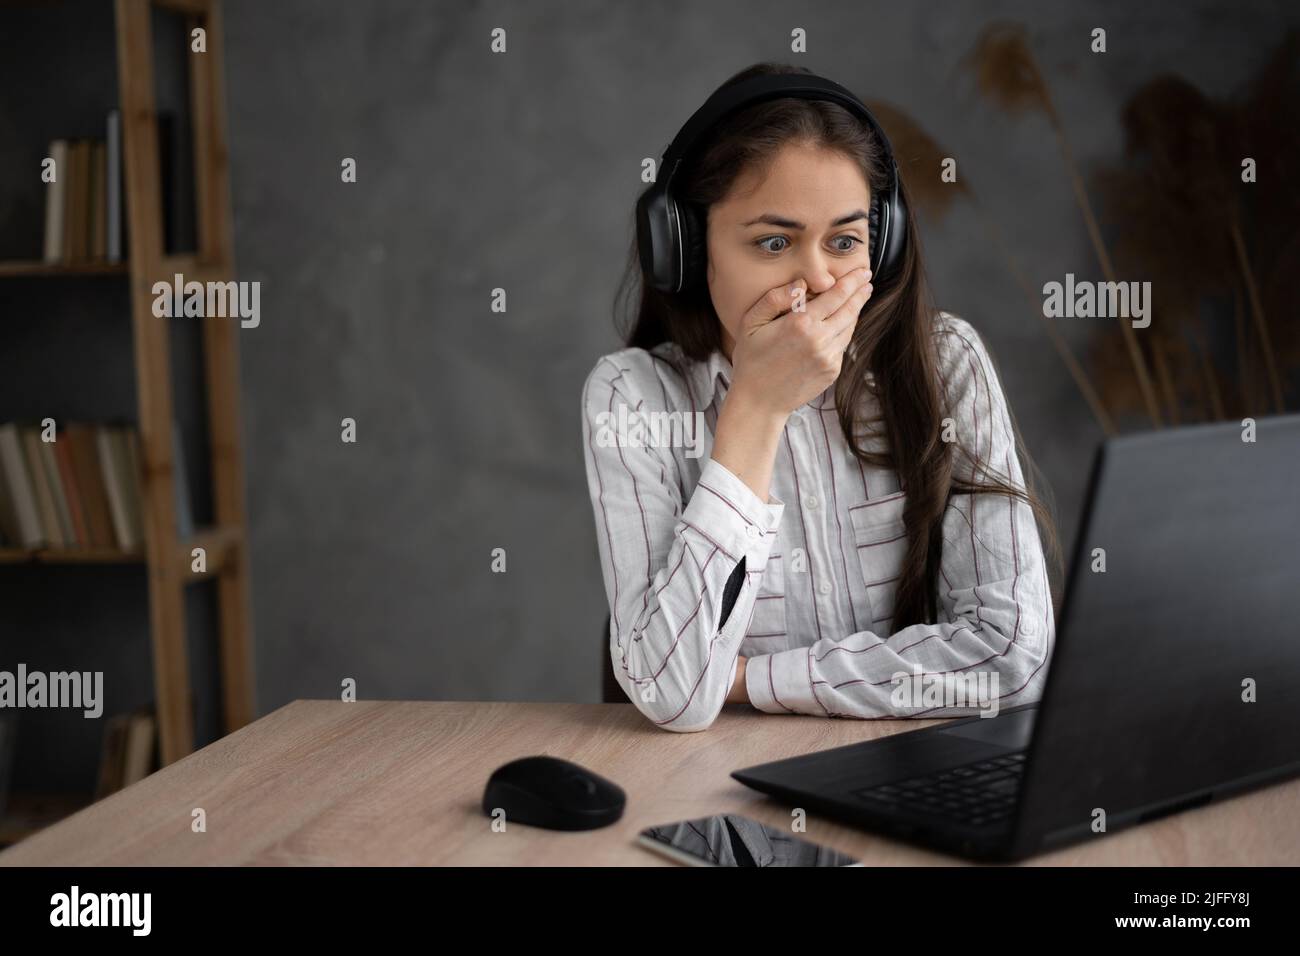 Young female watching scary movie, hiding face in fear, online film service. Hispanic young woman in headphones watching drama movie, worrying for Stock Photo